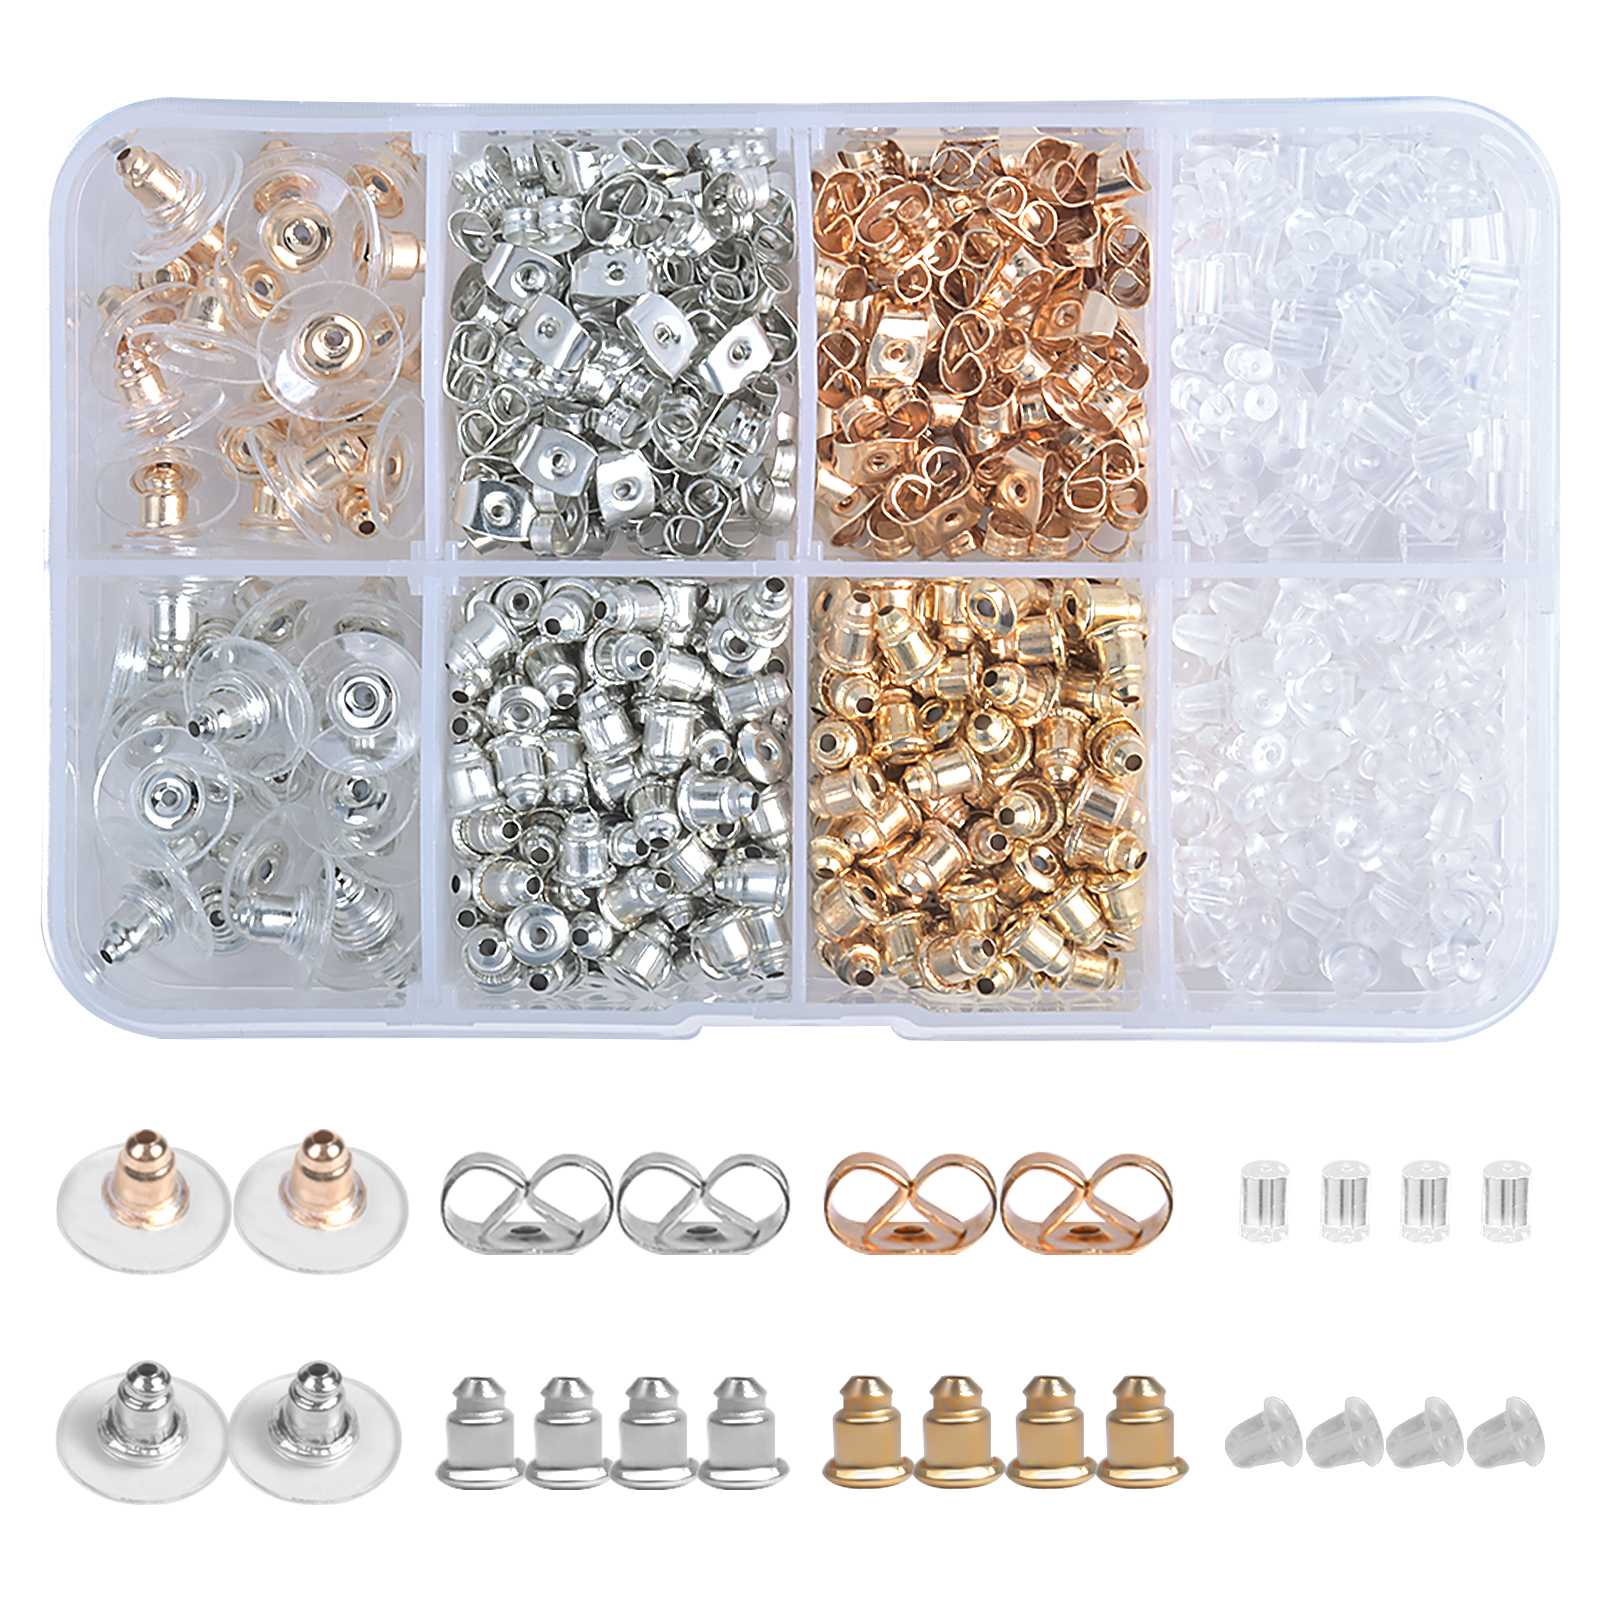 40 Pcs 18K Gold Earring Backs Replacements for Studs. 925 Stering Silver  Locking Earring Lifters. Hypoallergenic Secure Pierced Earring Backs for